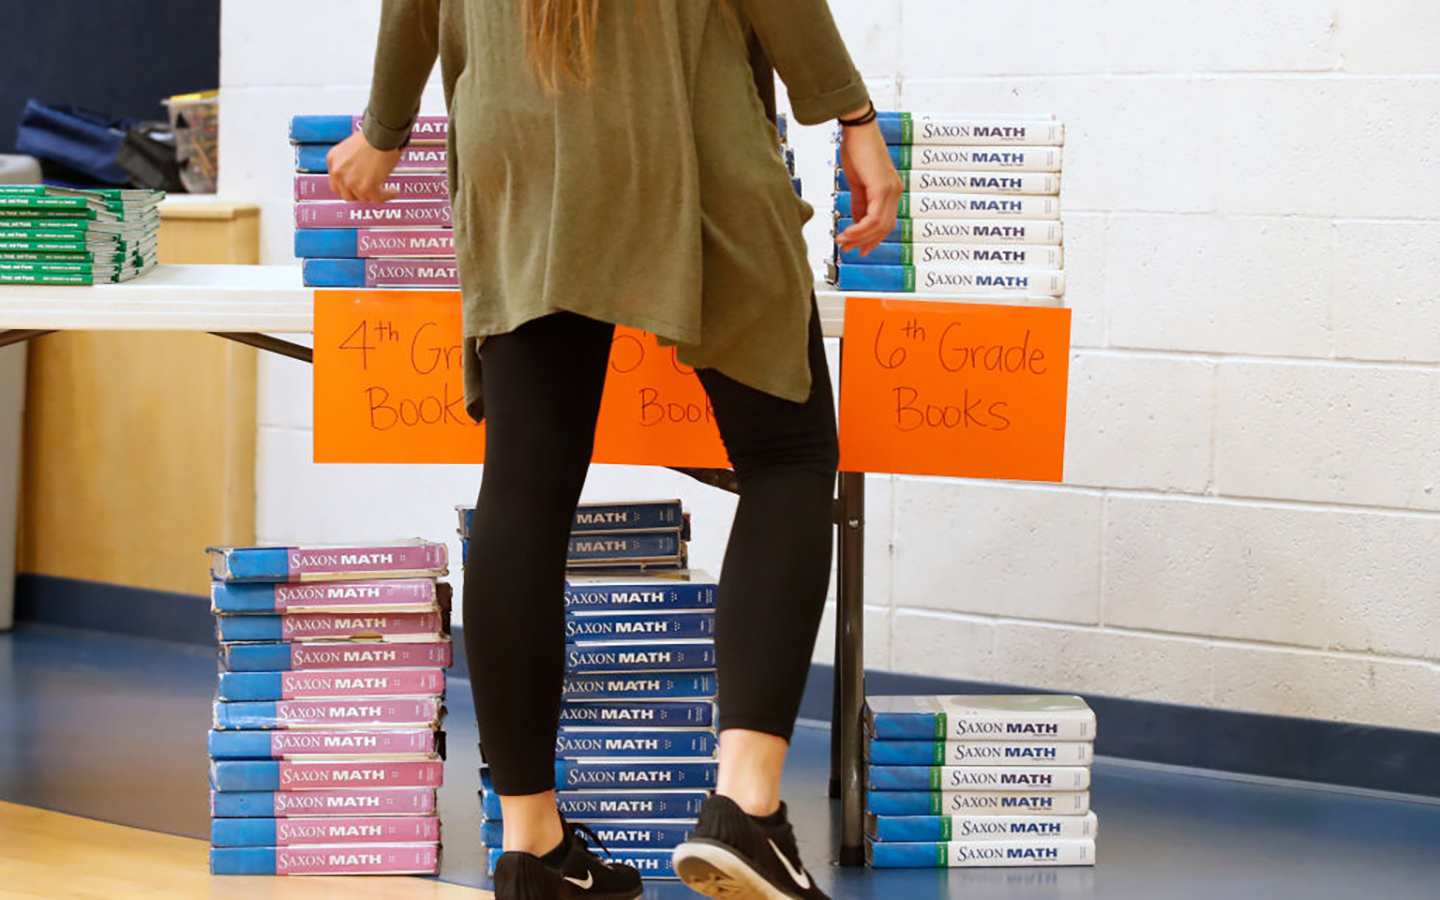 A photo of a teacher standing in front of piles of math textbooks